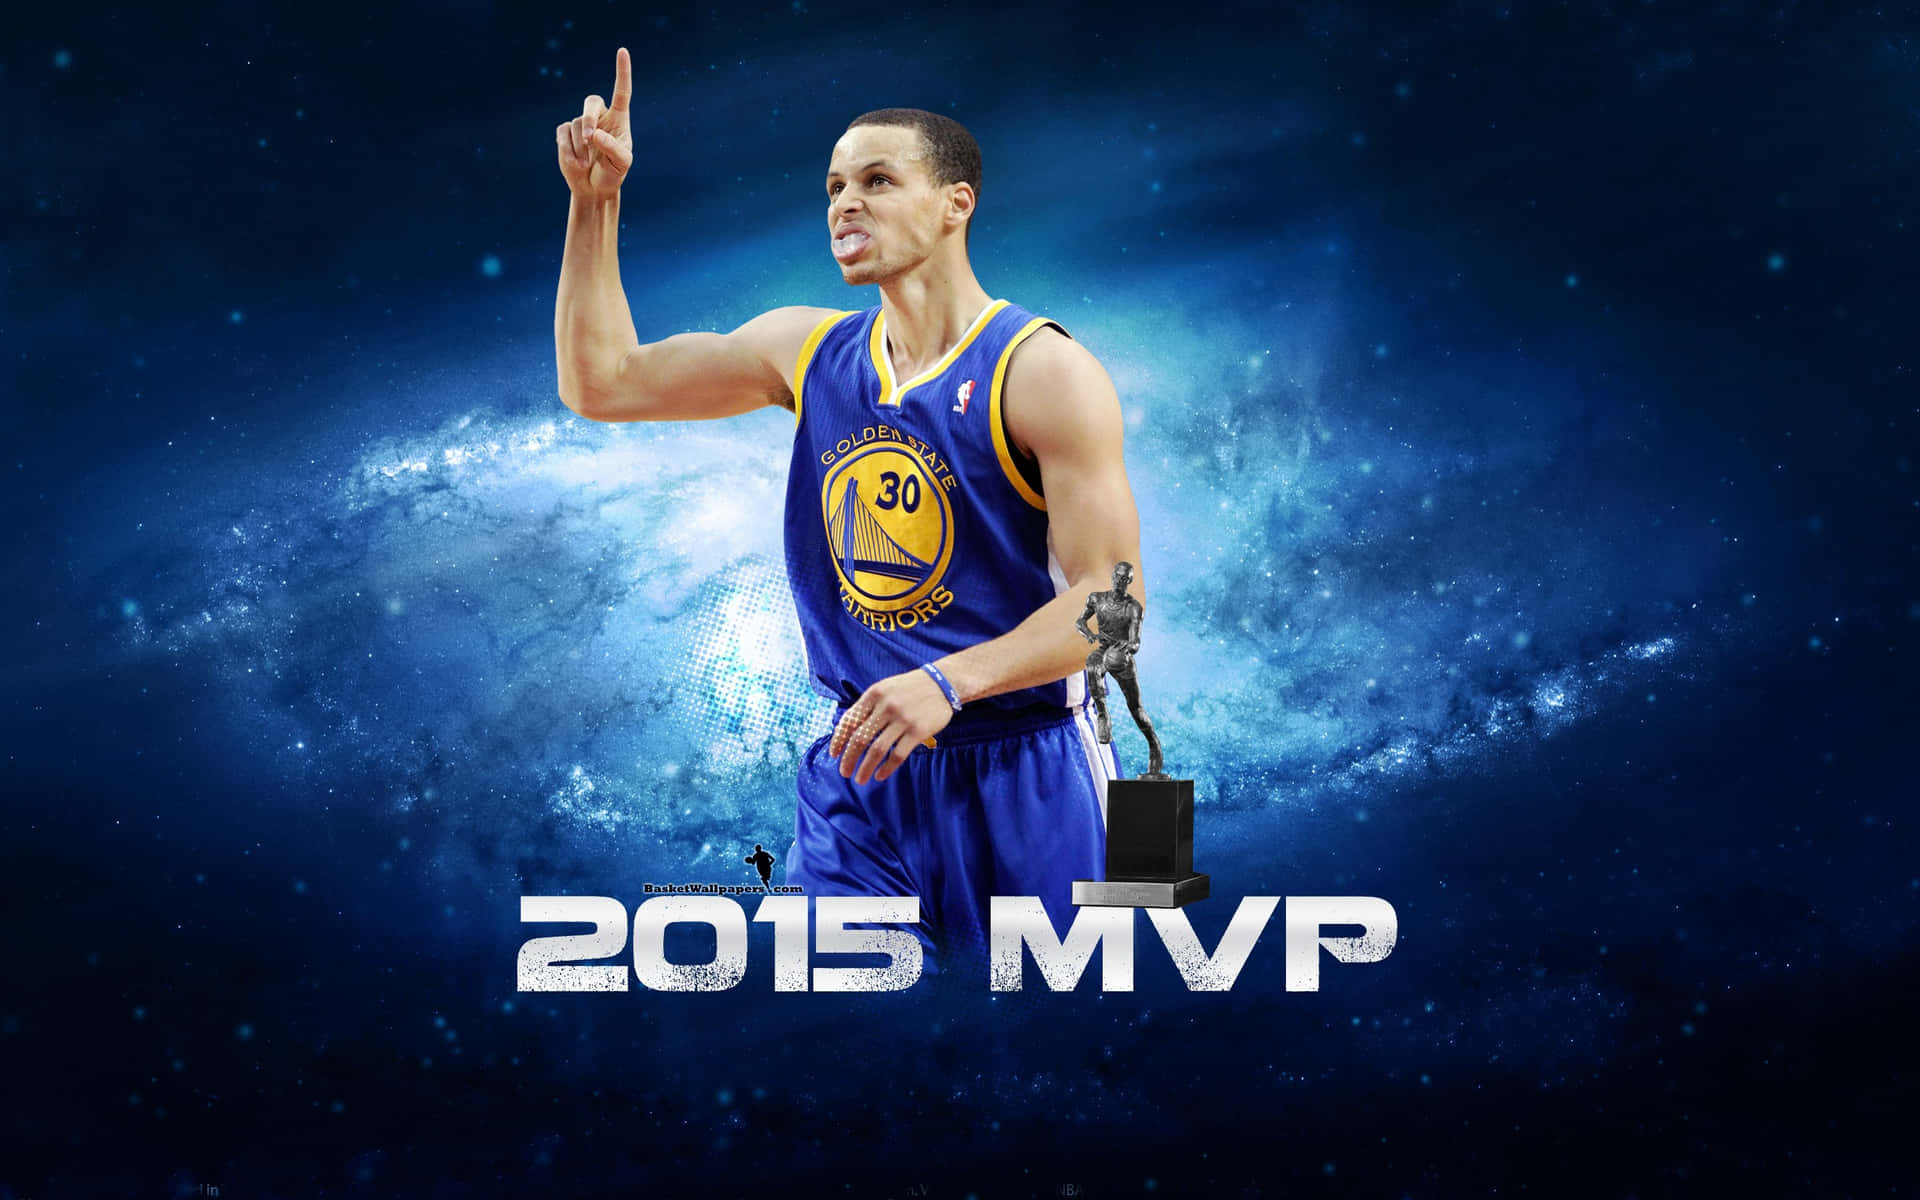 Cool Stephen Curry Wallpapers - Top 19 Best Cool Stephen Curry